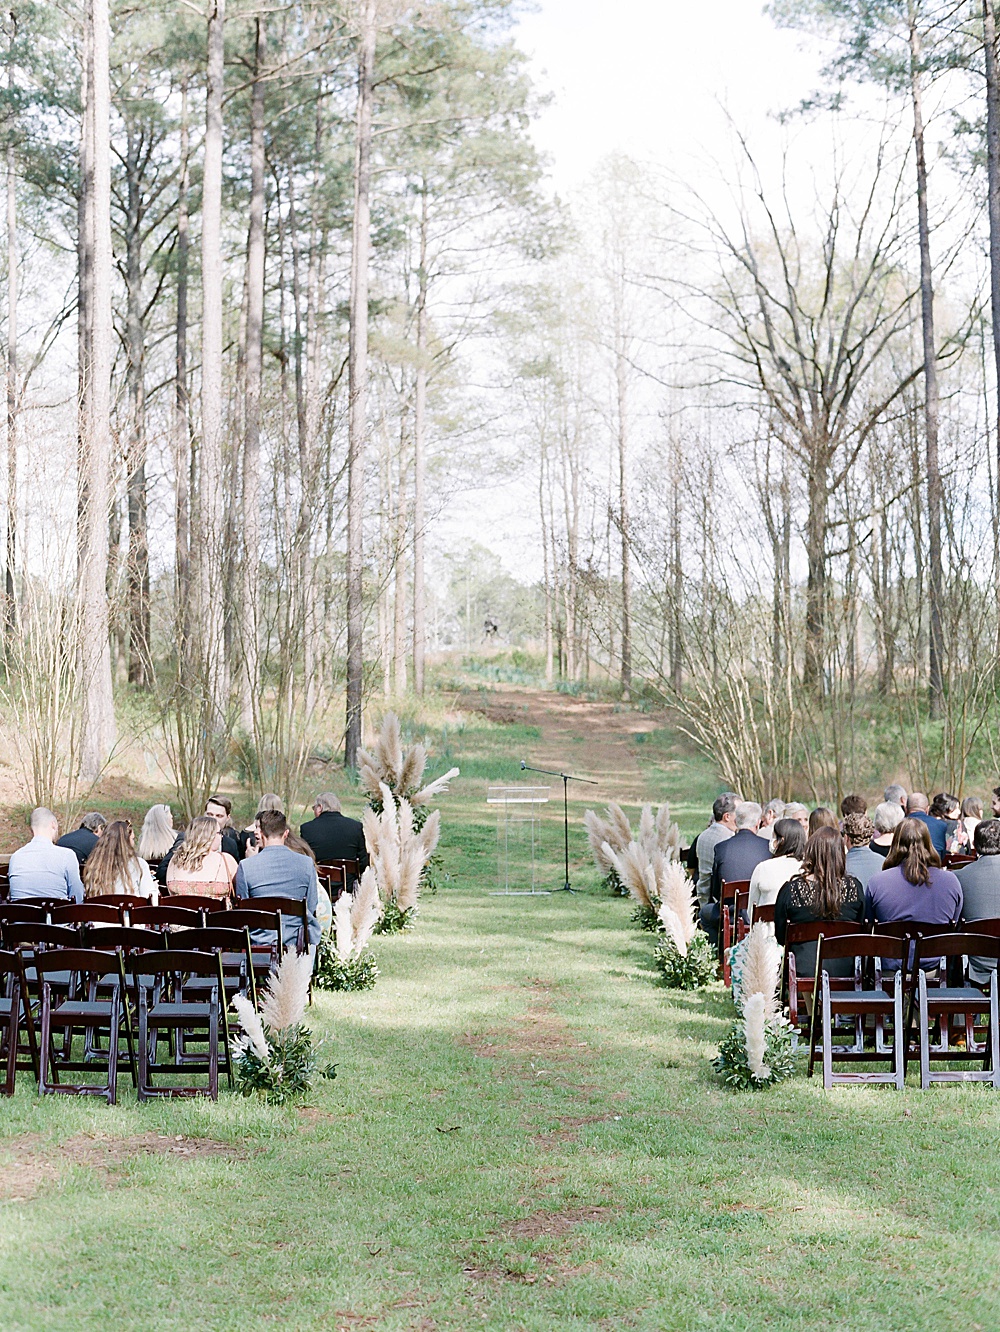 Wedding ceremony in open air function room at Inn at Serenbe